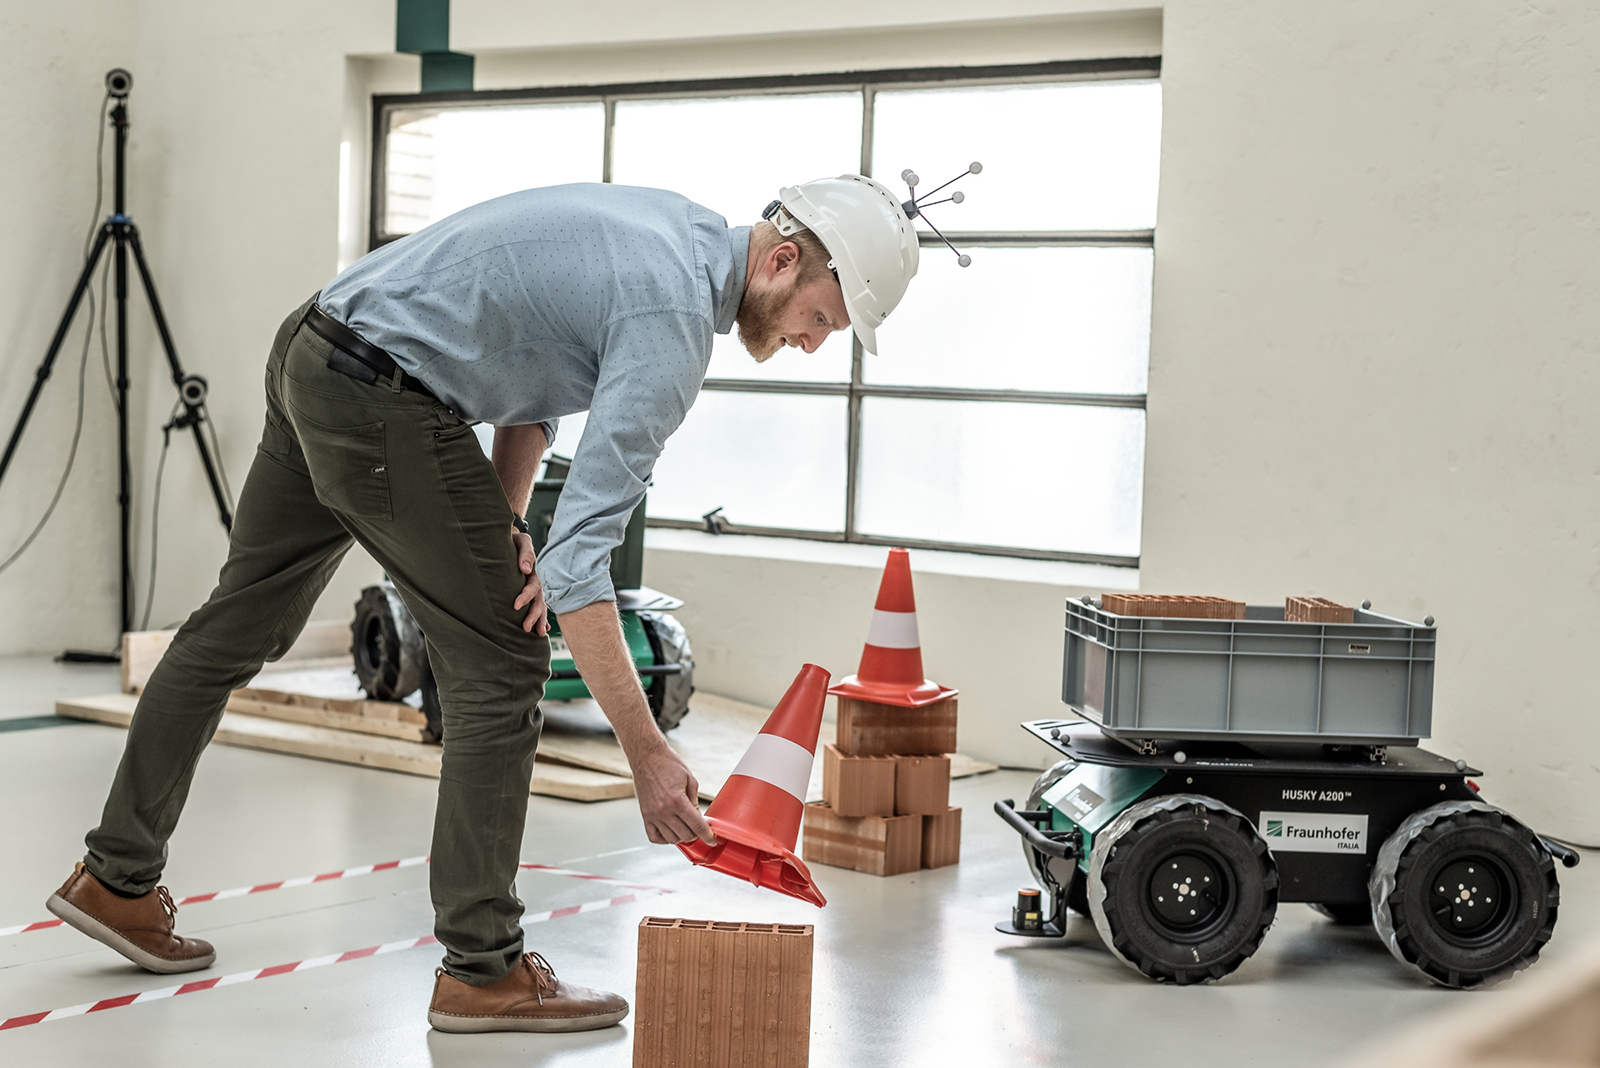 Trials with the mobile robot platform on a mock construction site.